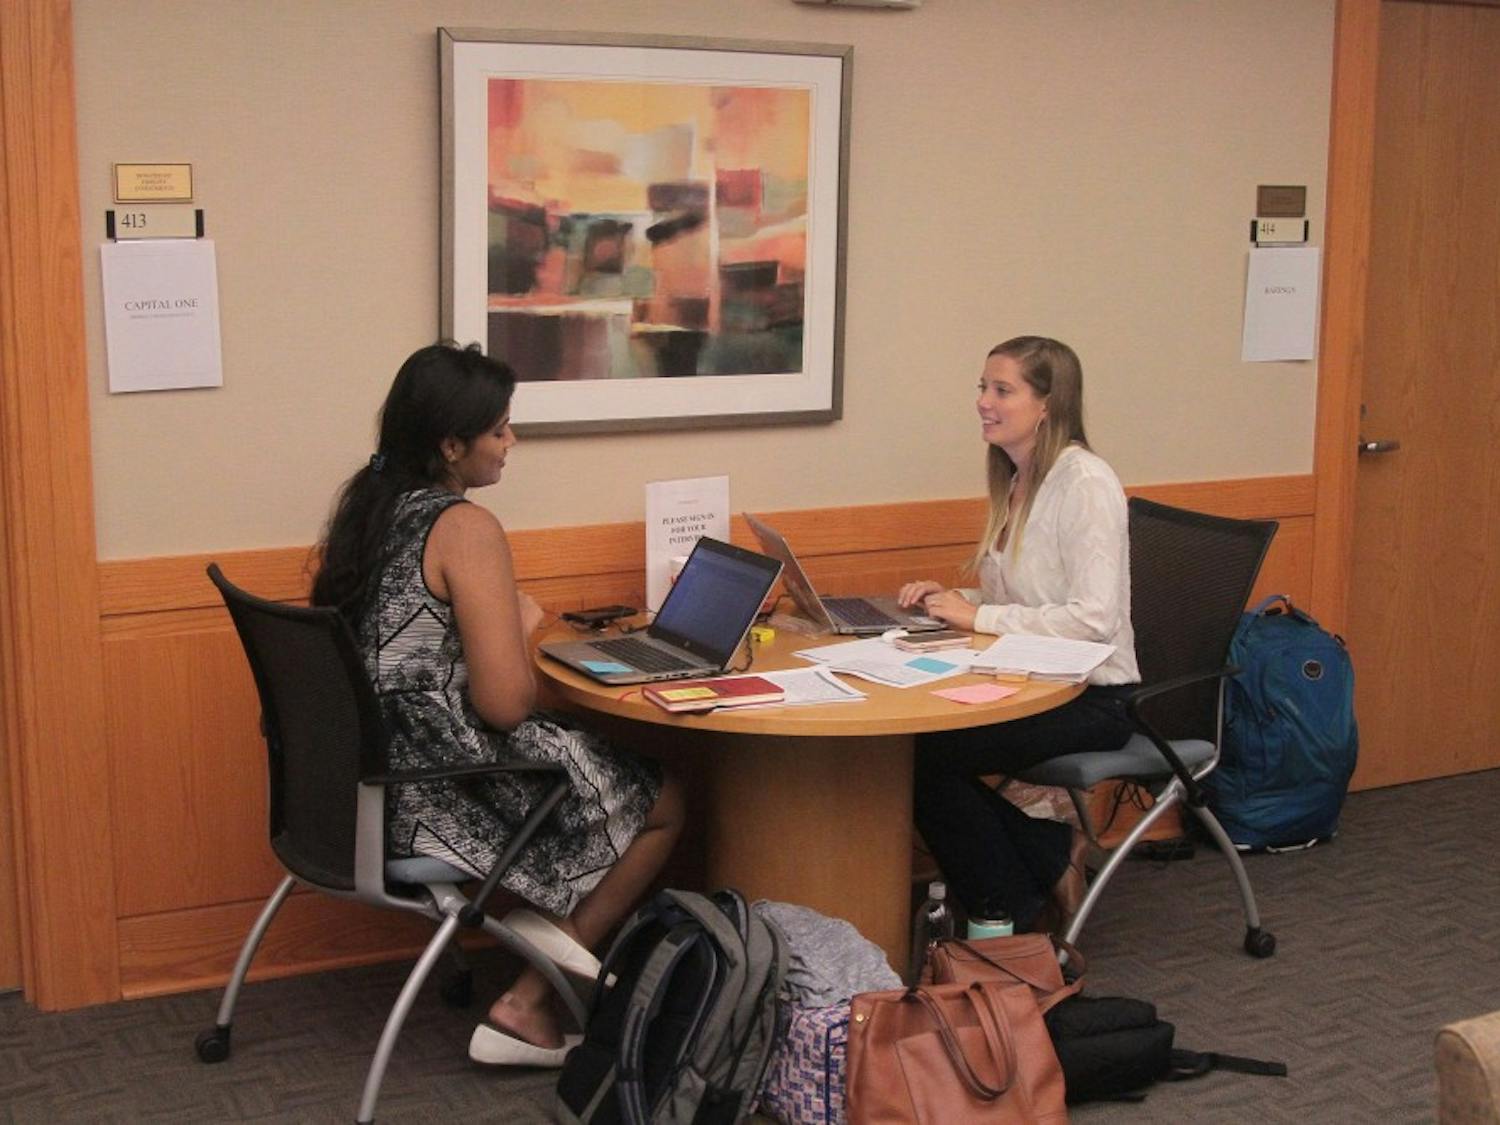 Alexis Barron (right) and Sri Sure (left) manage interviews at the University Career Services Center on the 4th floor of Hanes hall on Wednesday, Sept. 26, 2018.